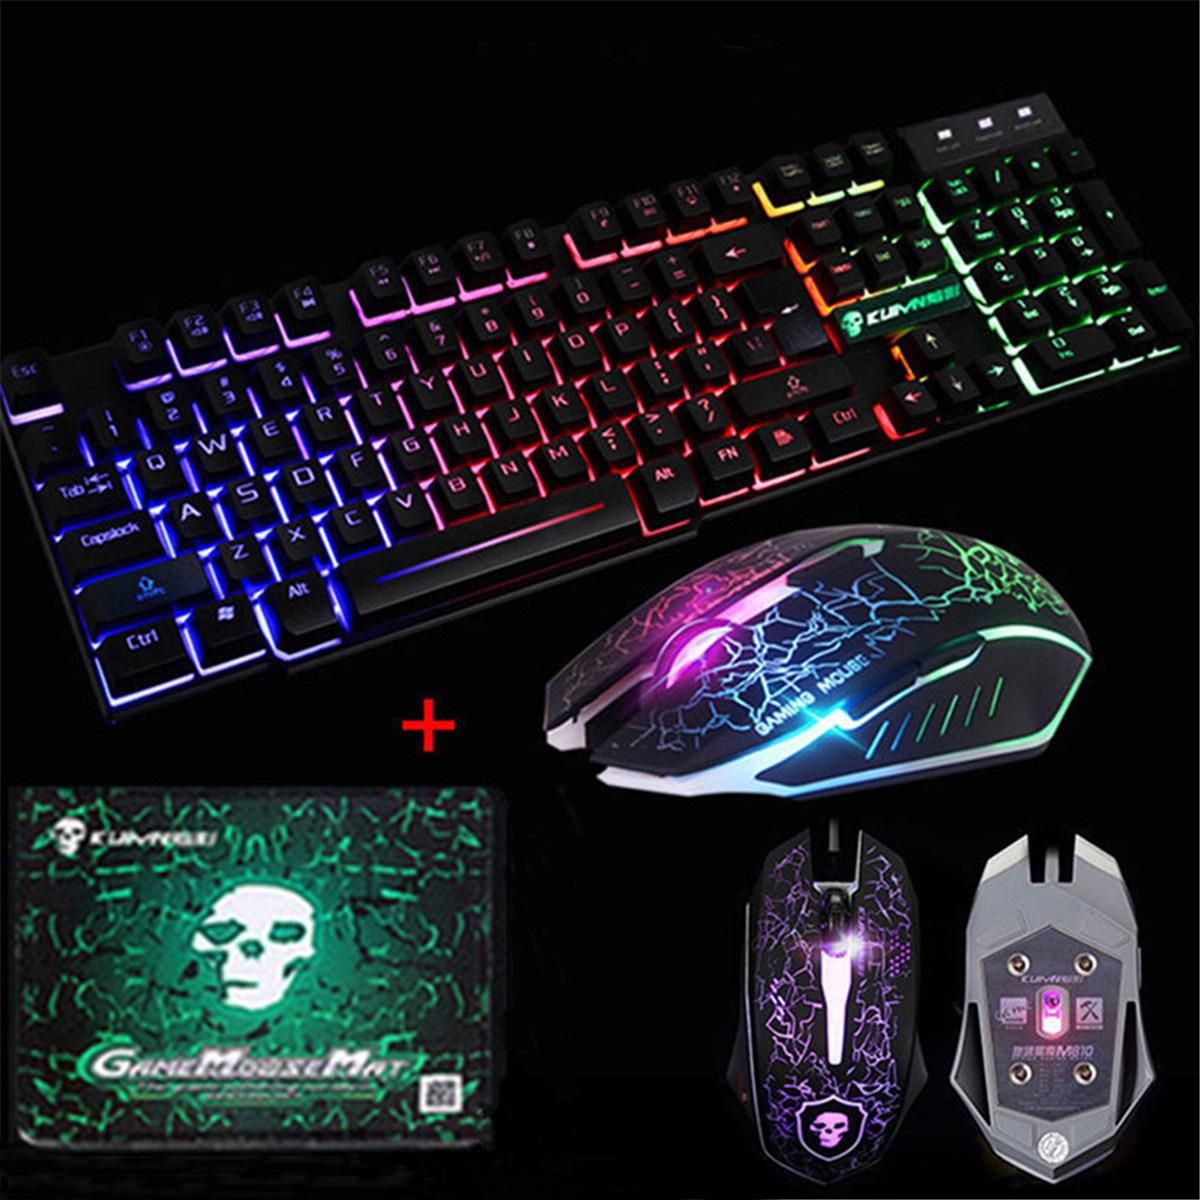 Buy LED Backlit Gaming Keyboard+2400DPI Mouse Sets+Mouse Pad USB Wired